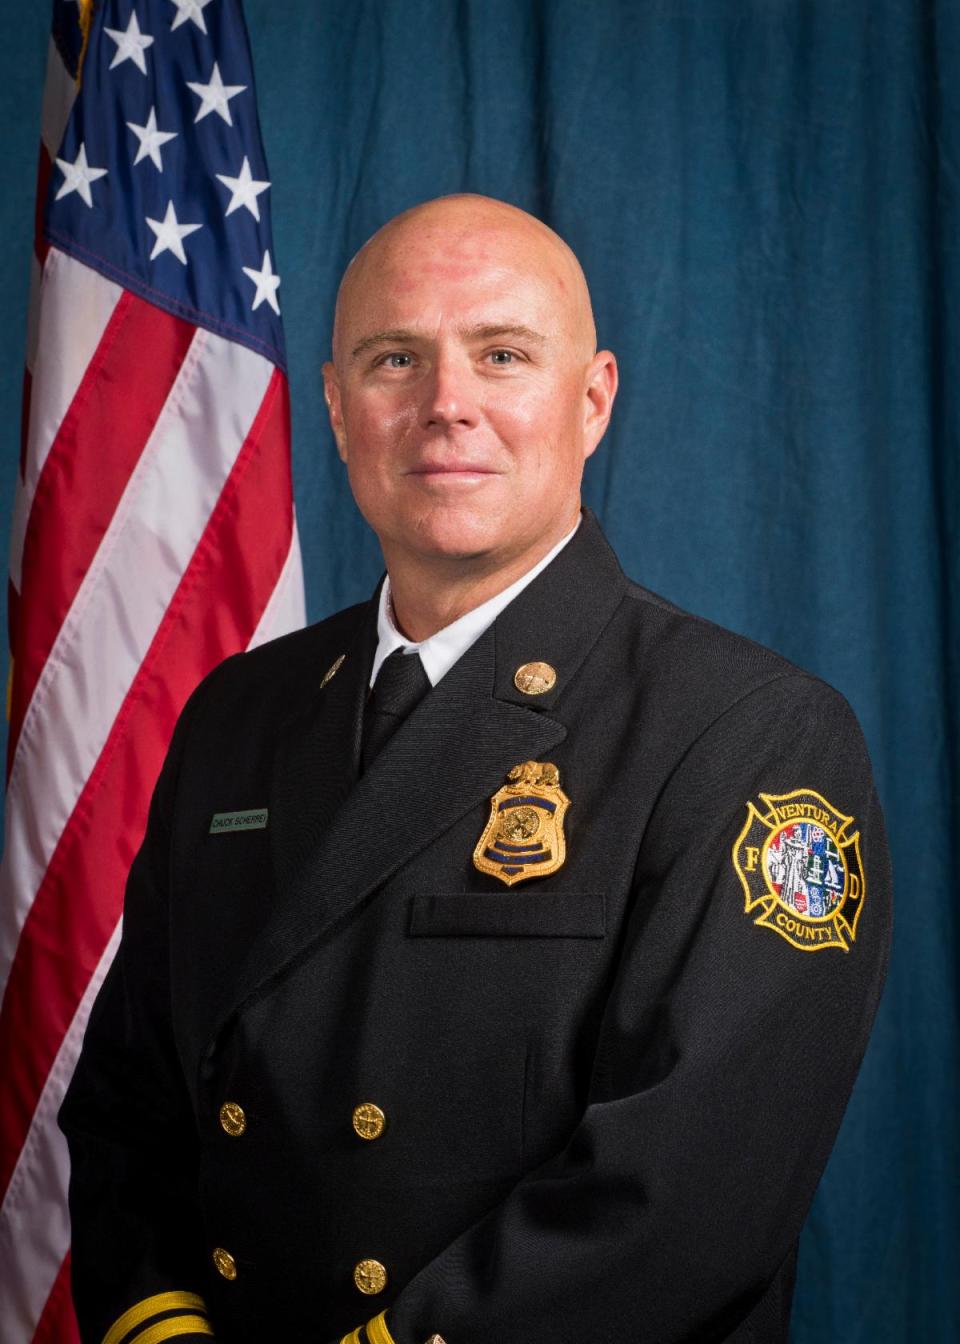 Chuck Scherrei has been promoted to Ventura County Fire Department's assistant chief of operations.